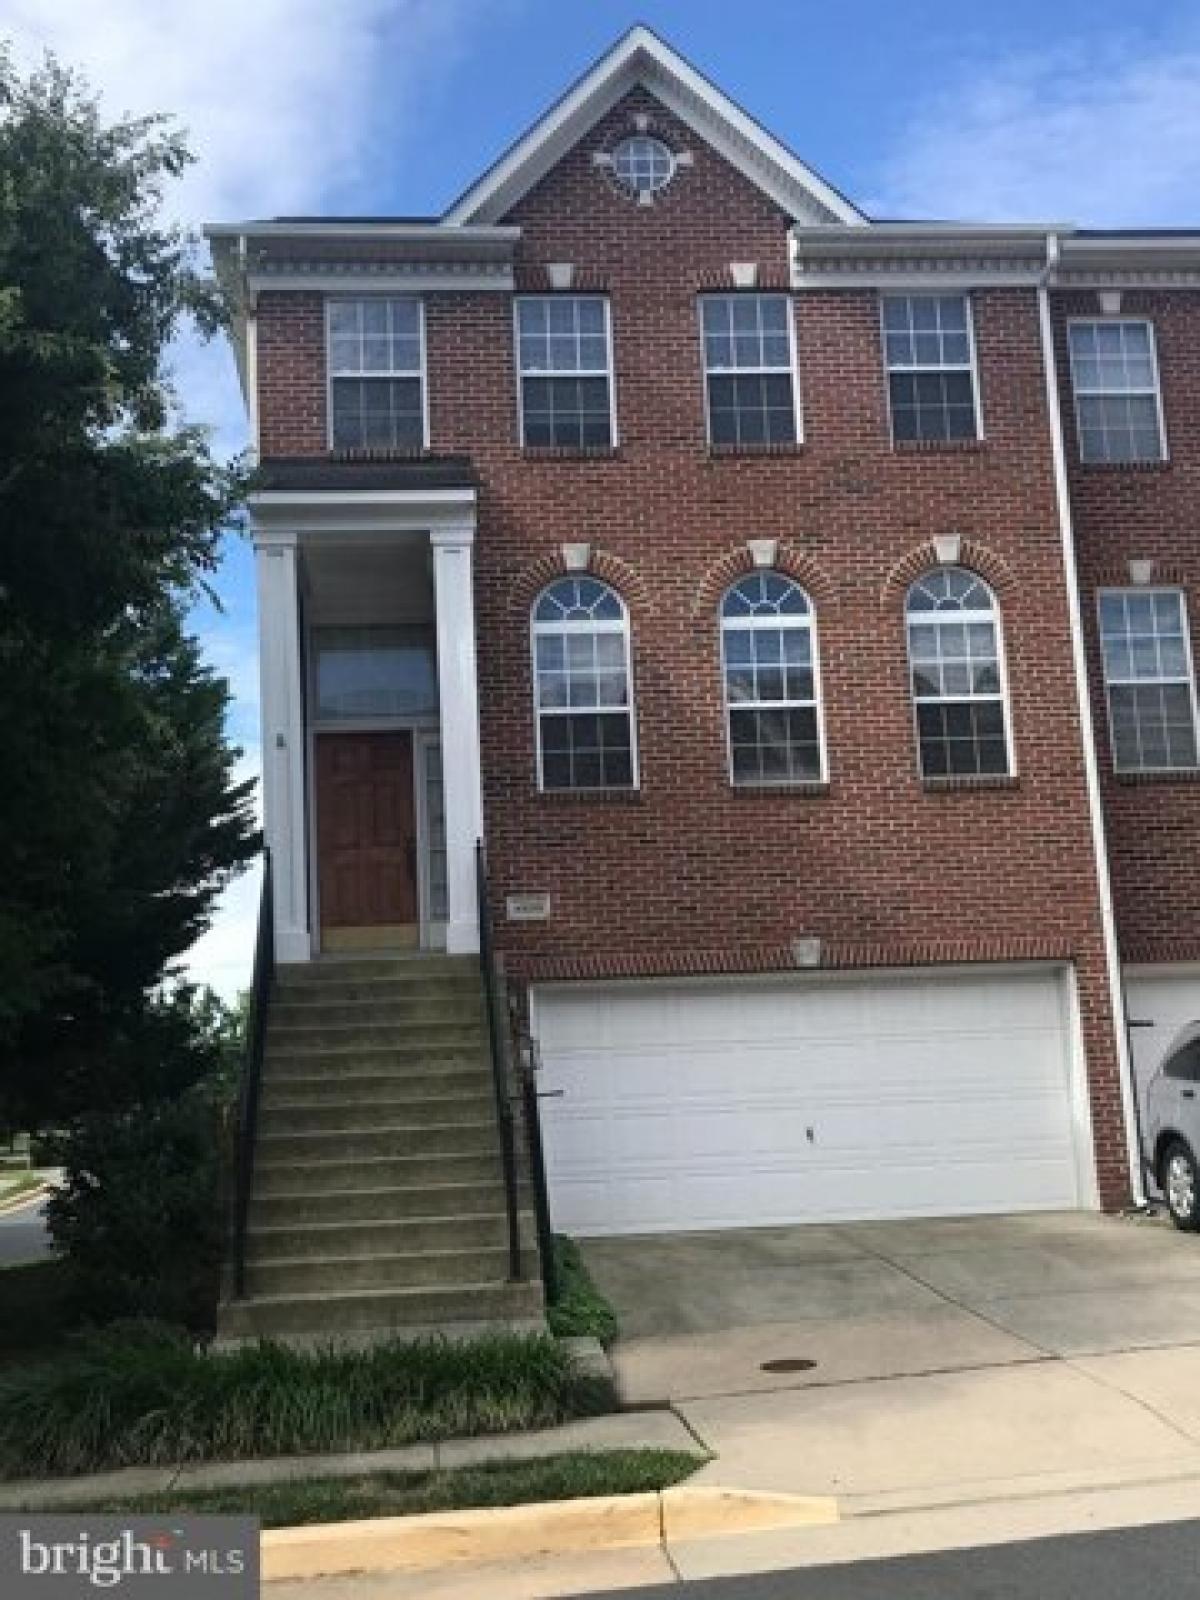 Picture of Home For Rent in Leesburg, Virginia, United States